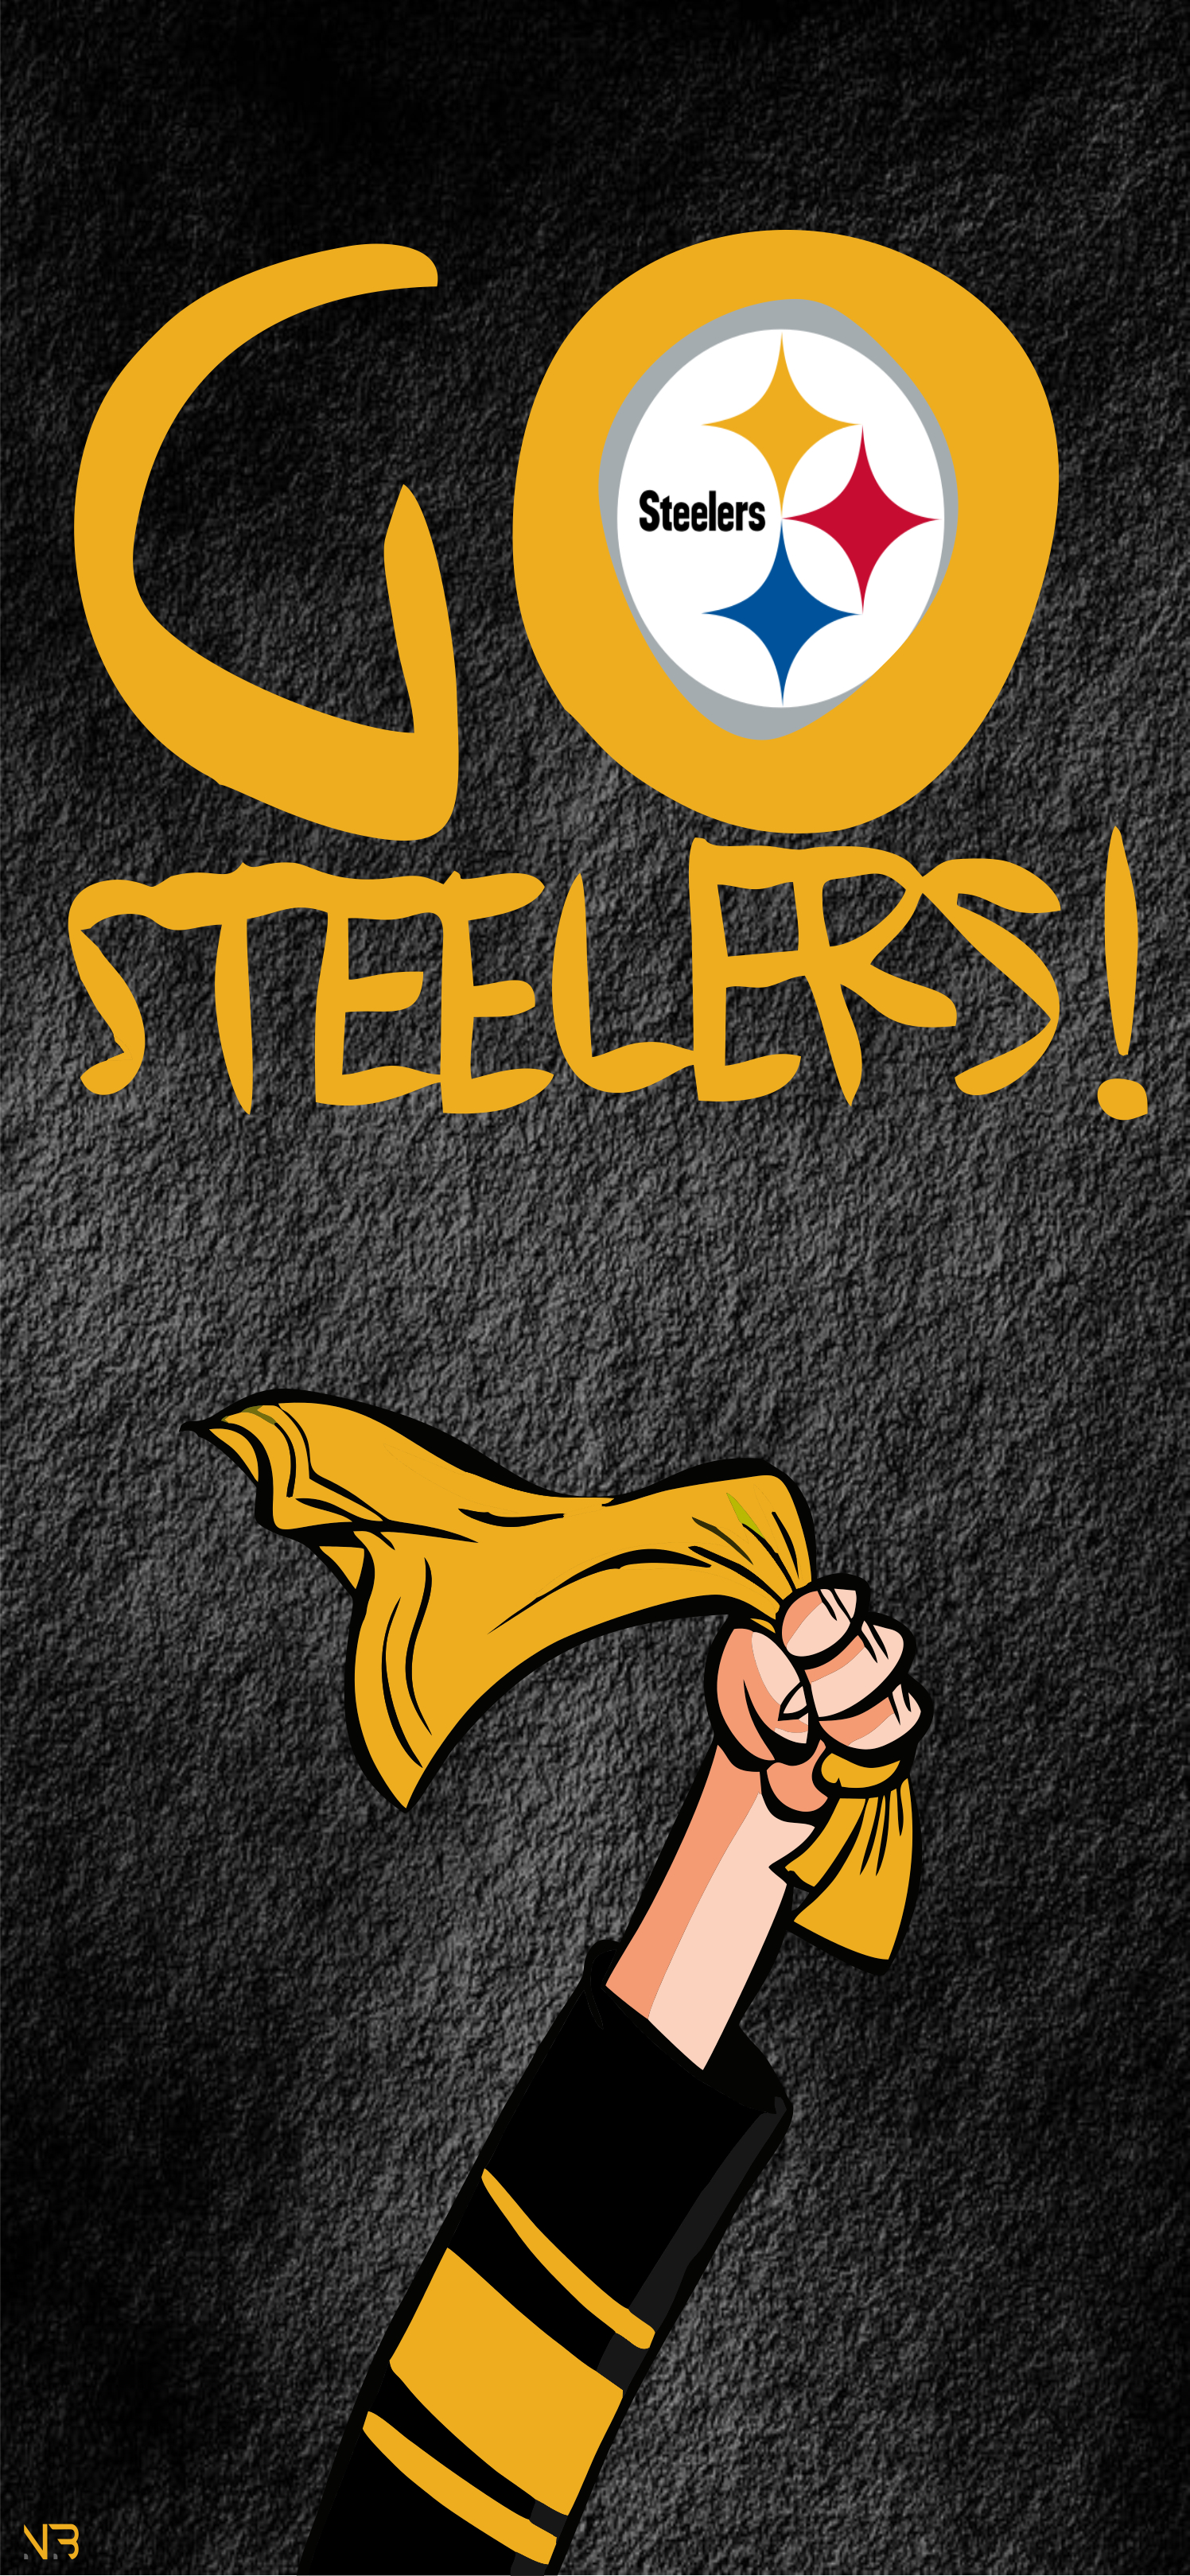 1496x3239 Go for 9-0! | Pittsburgh steelers wallpaper, Pittsburgh steelers funny, Steelers